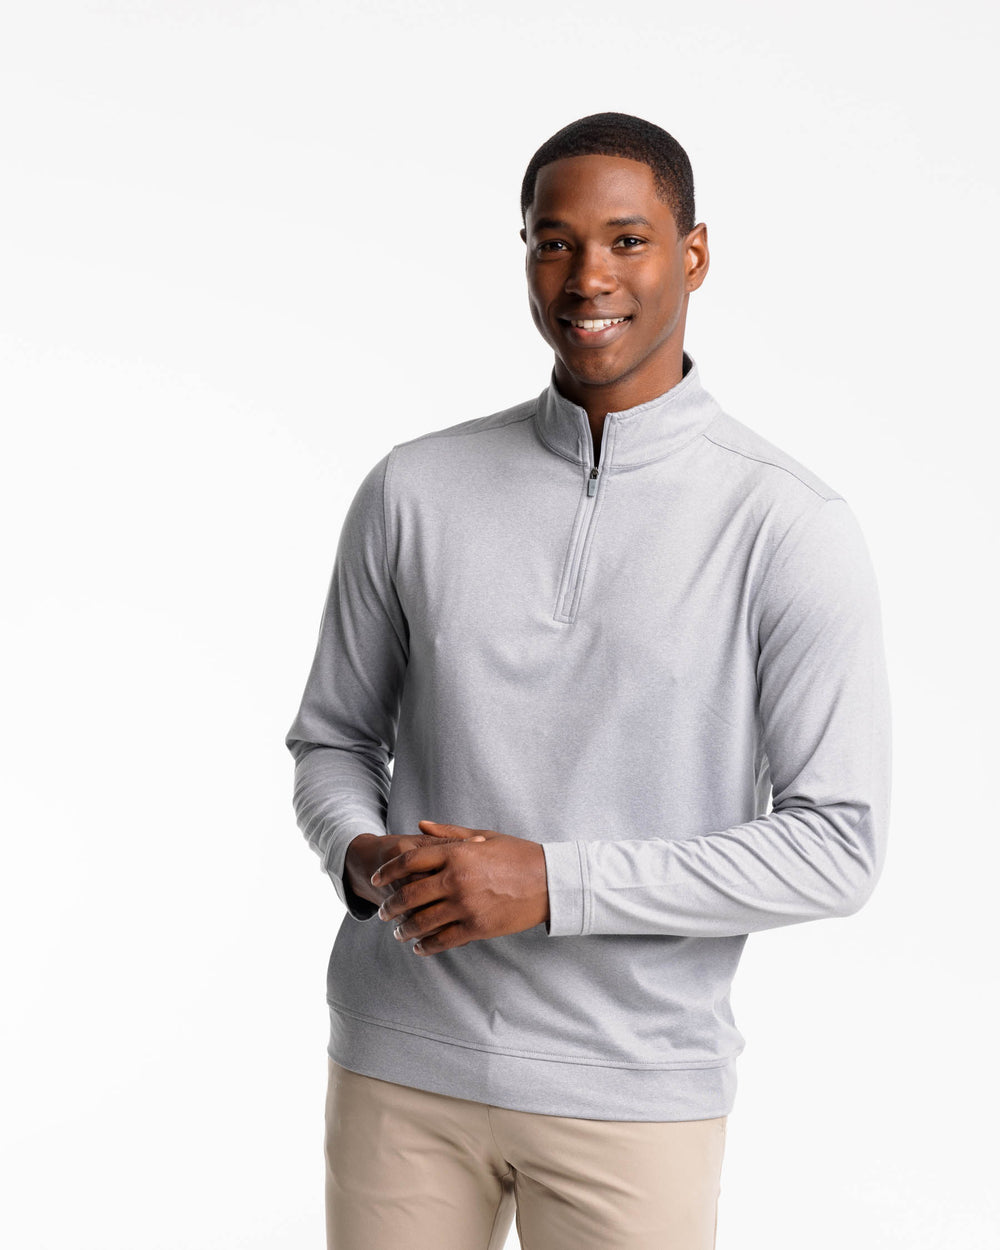 The front view of the Backbarrier Heather Performance Quarter Zip Pullover by Southern Tide - Heather Steel Grey